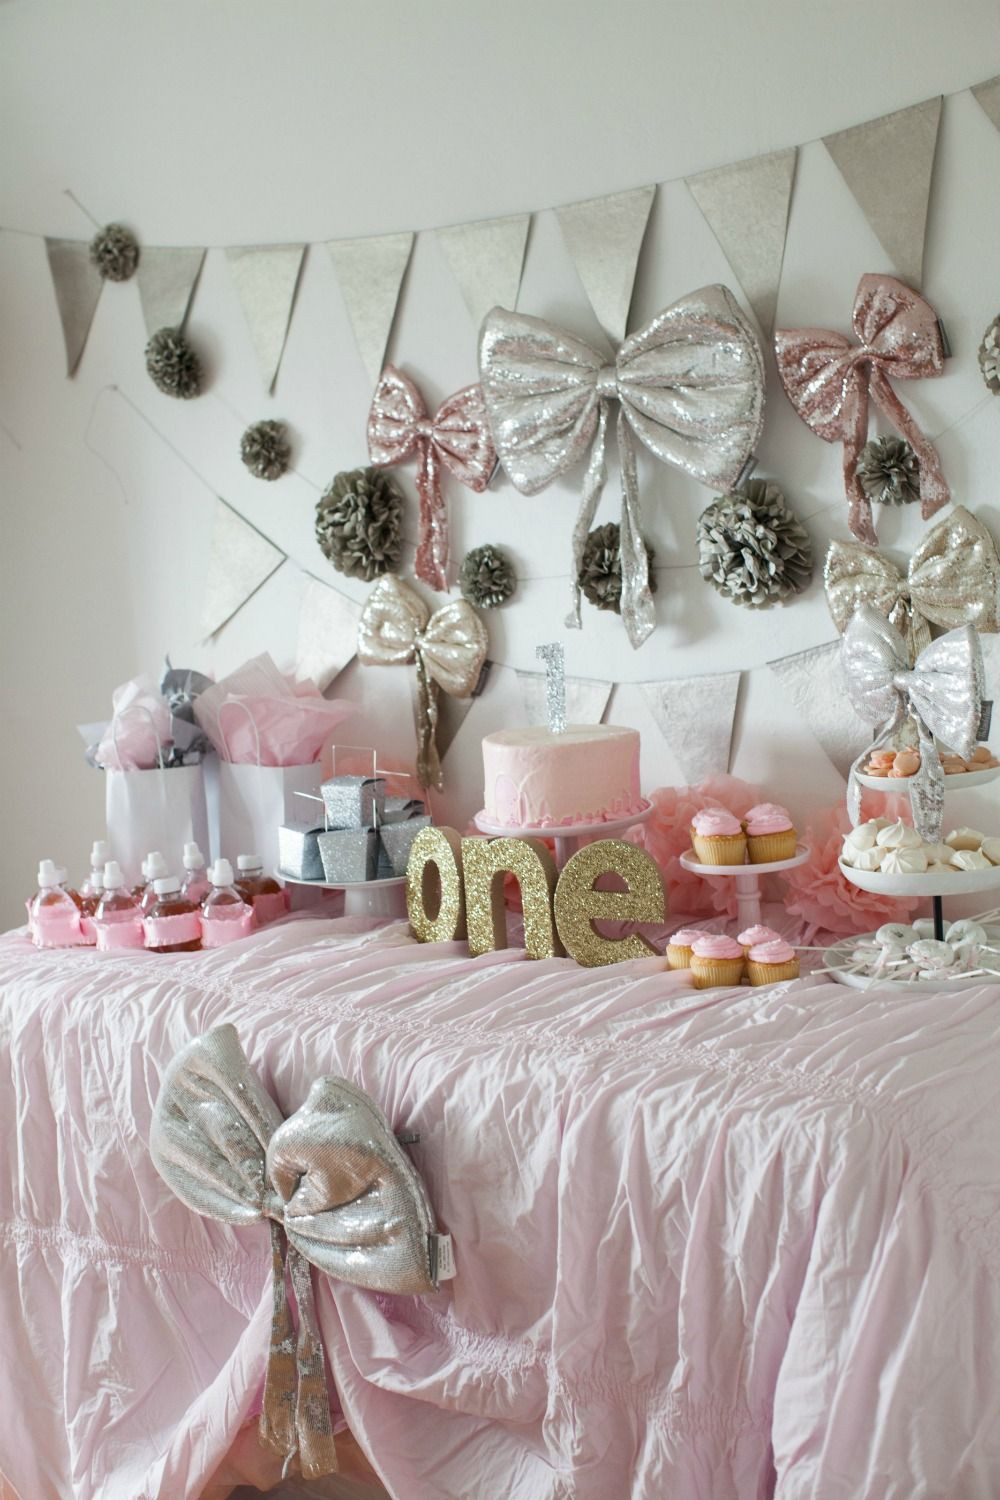 Baby Girl First Birthday Party Decorations
 Girl First Birthday Party